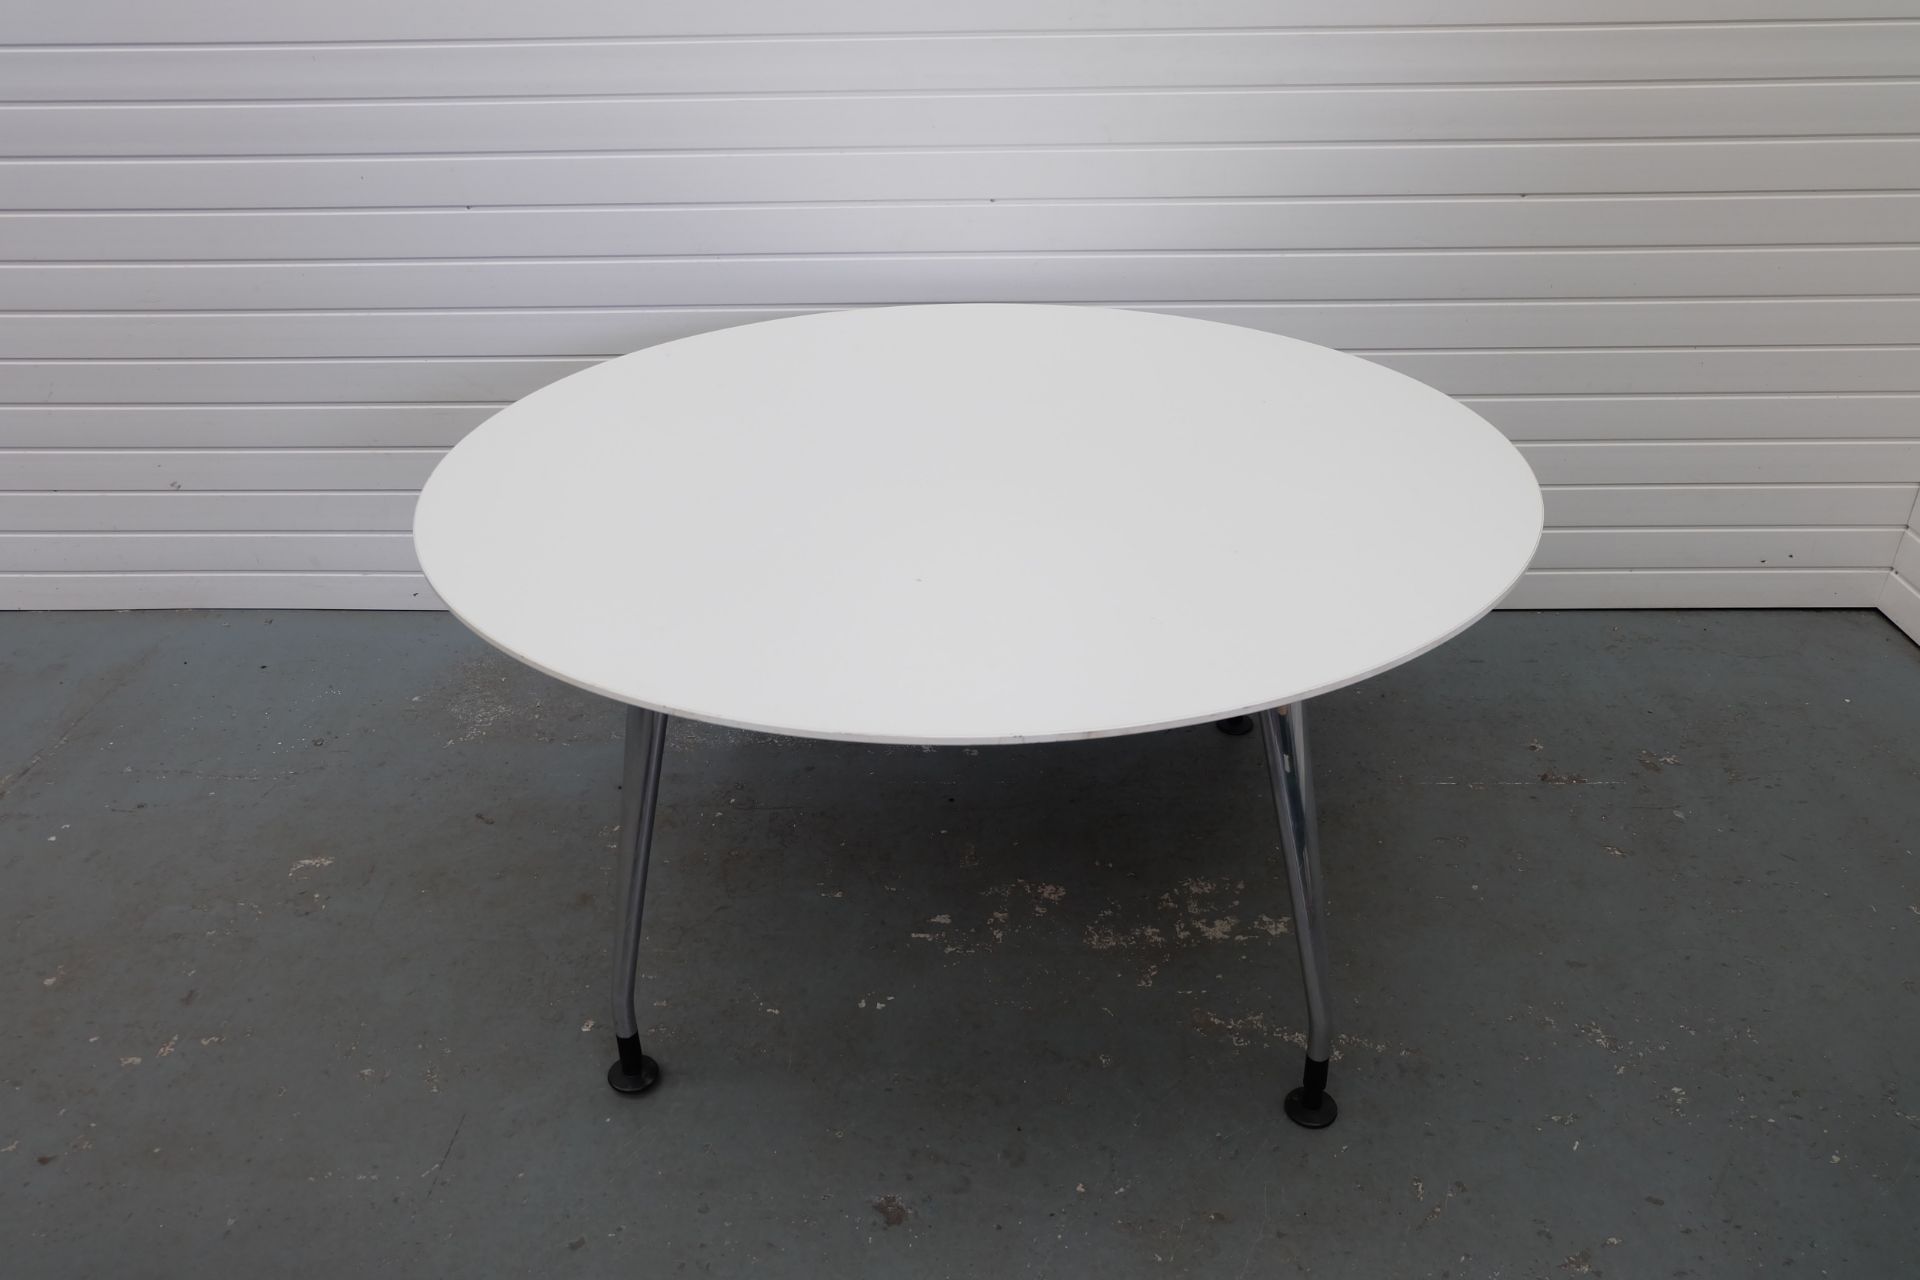 White Round Table. 4 Metal Legs and Adjustable Feet. Size 1500mm Diameter x 800mm High. - Image 2 of 3